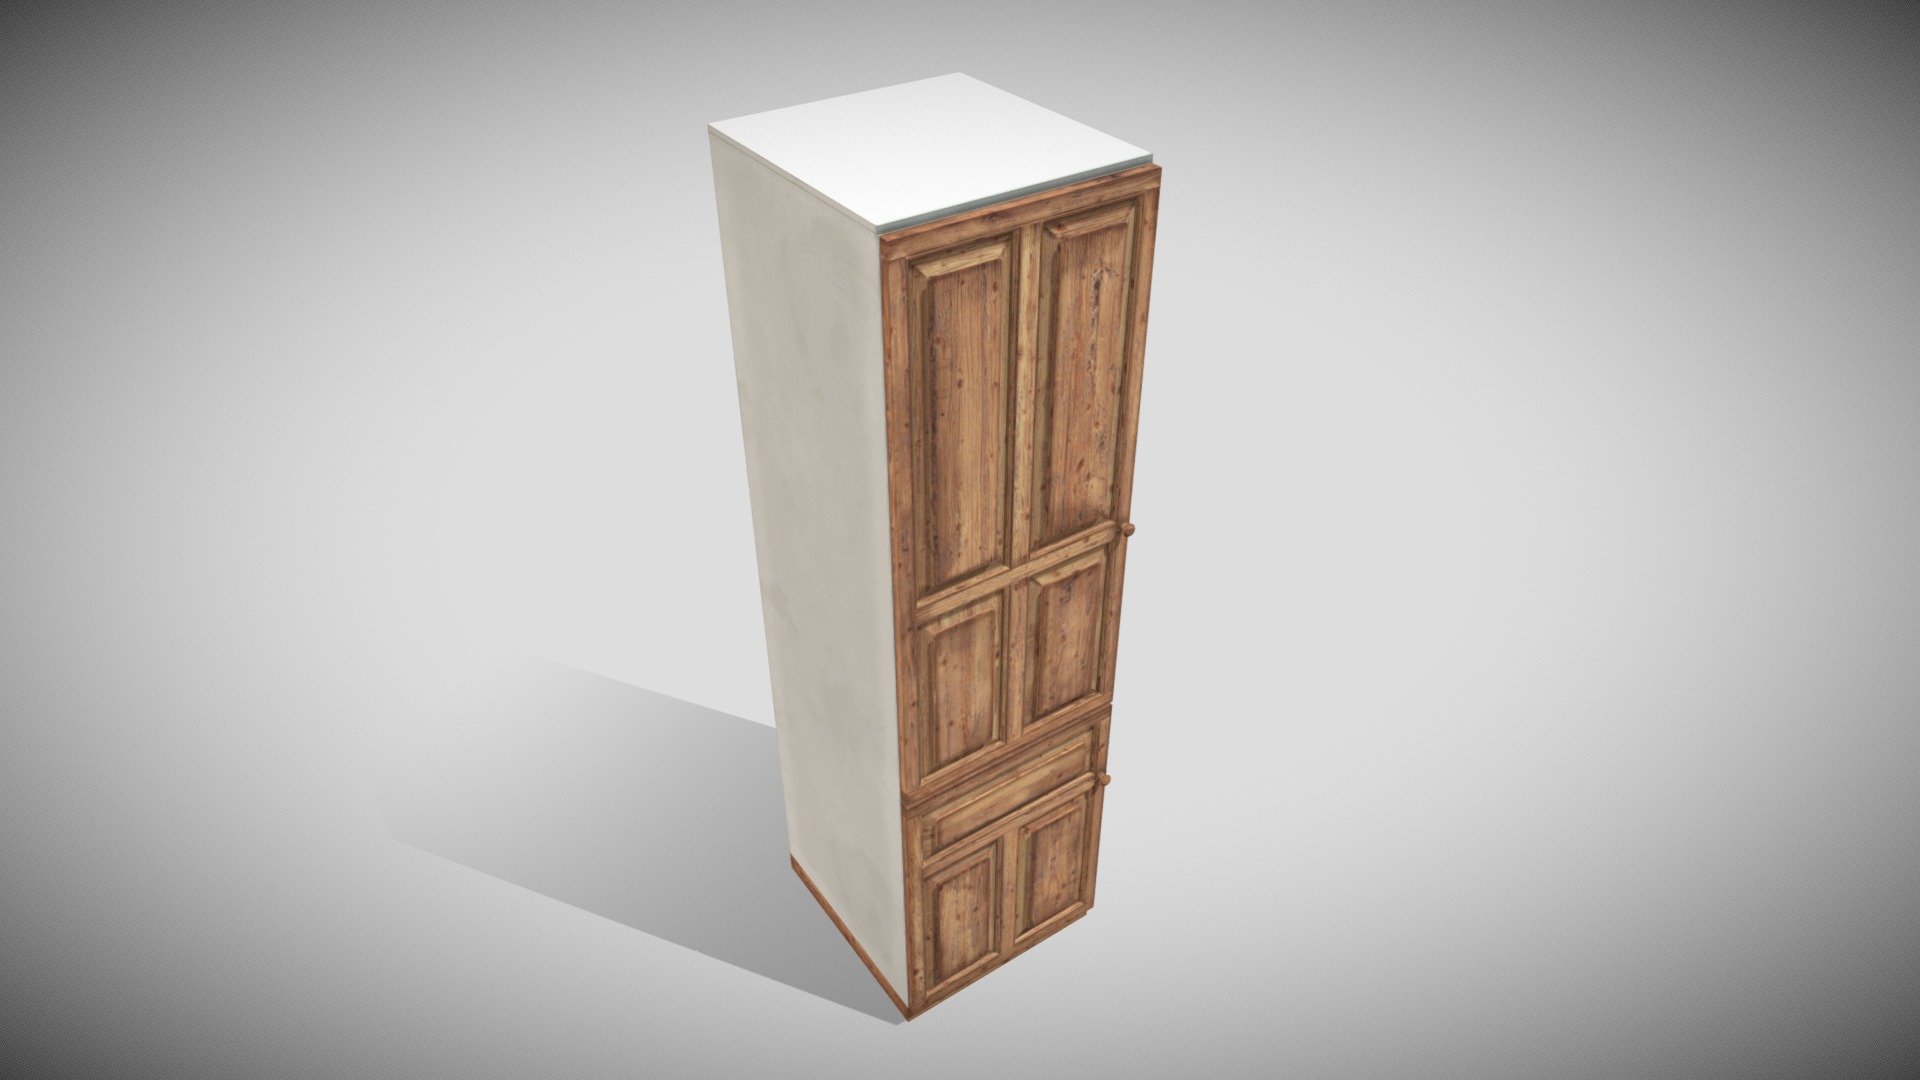 One Material PBR 4k Metalness

Pivot at Zero Bottom

Size OK

Door are separate objects with Pivot in right place and can be animated

Complete Compilatio https://skfb.ly/ovXFn - Kitchen Modules - Mod H - Buy Royalty Free 3D model by Francesco Coldesina (@topfrank2013) 3d model